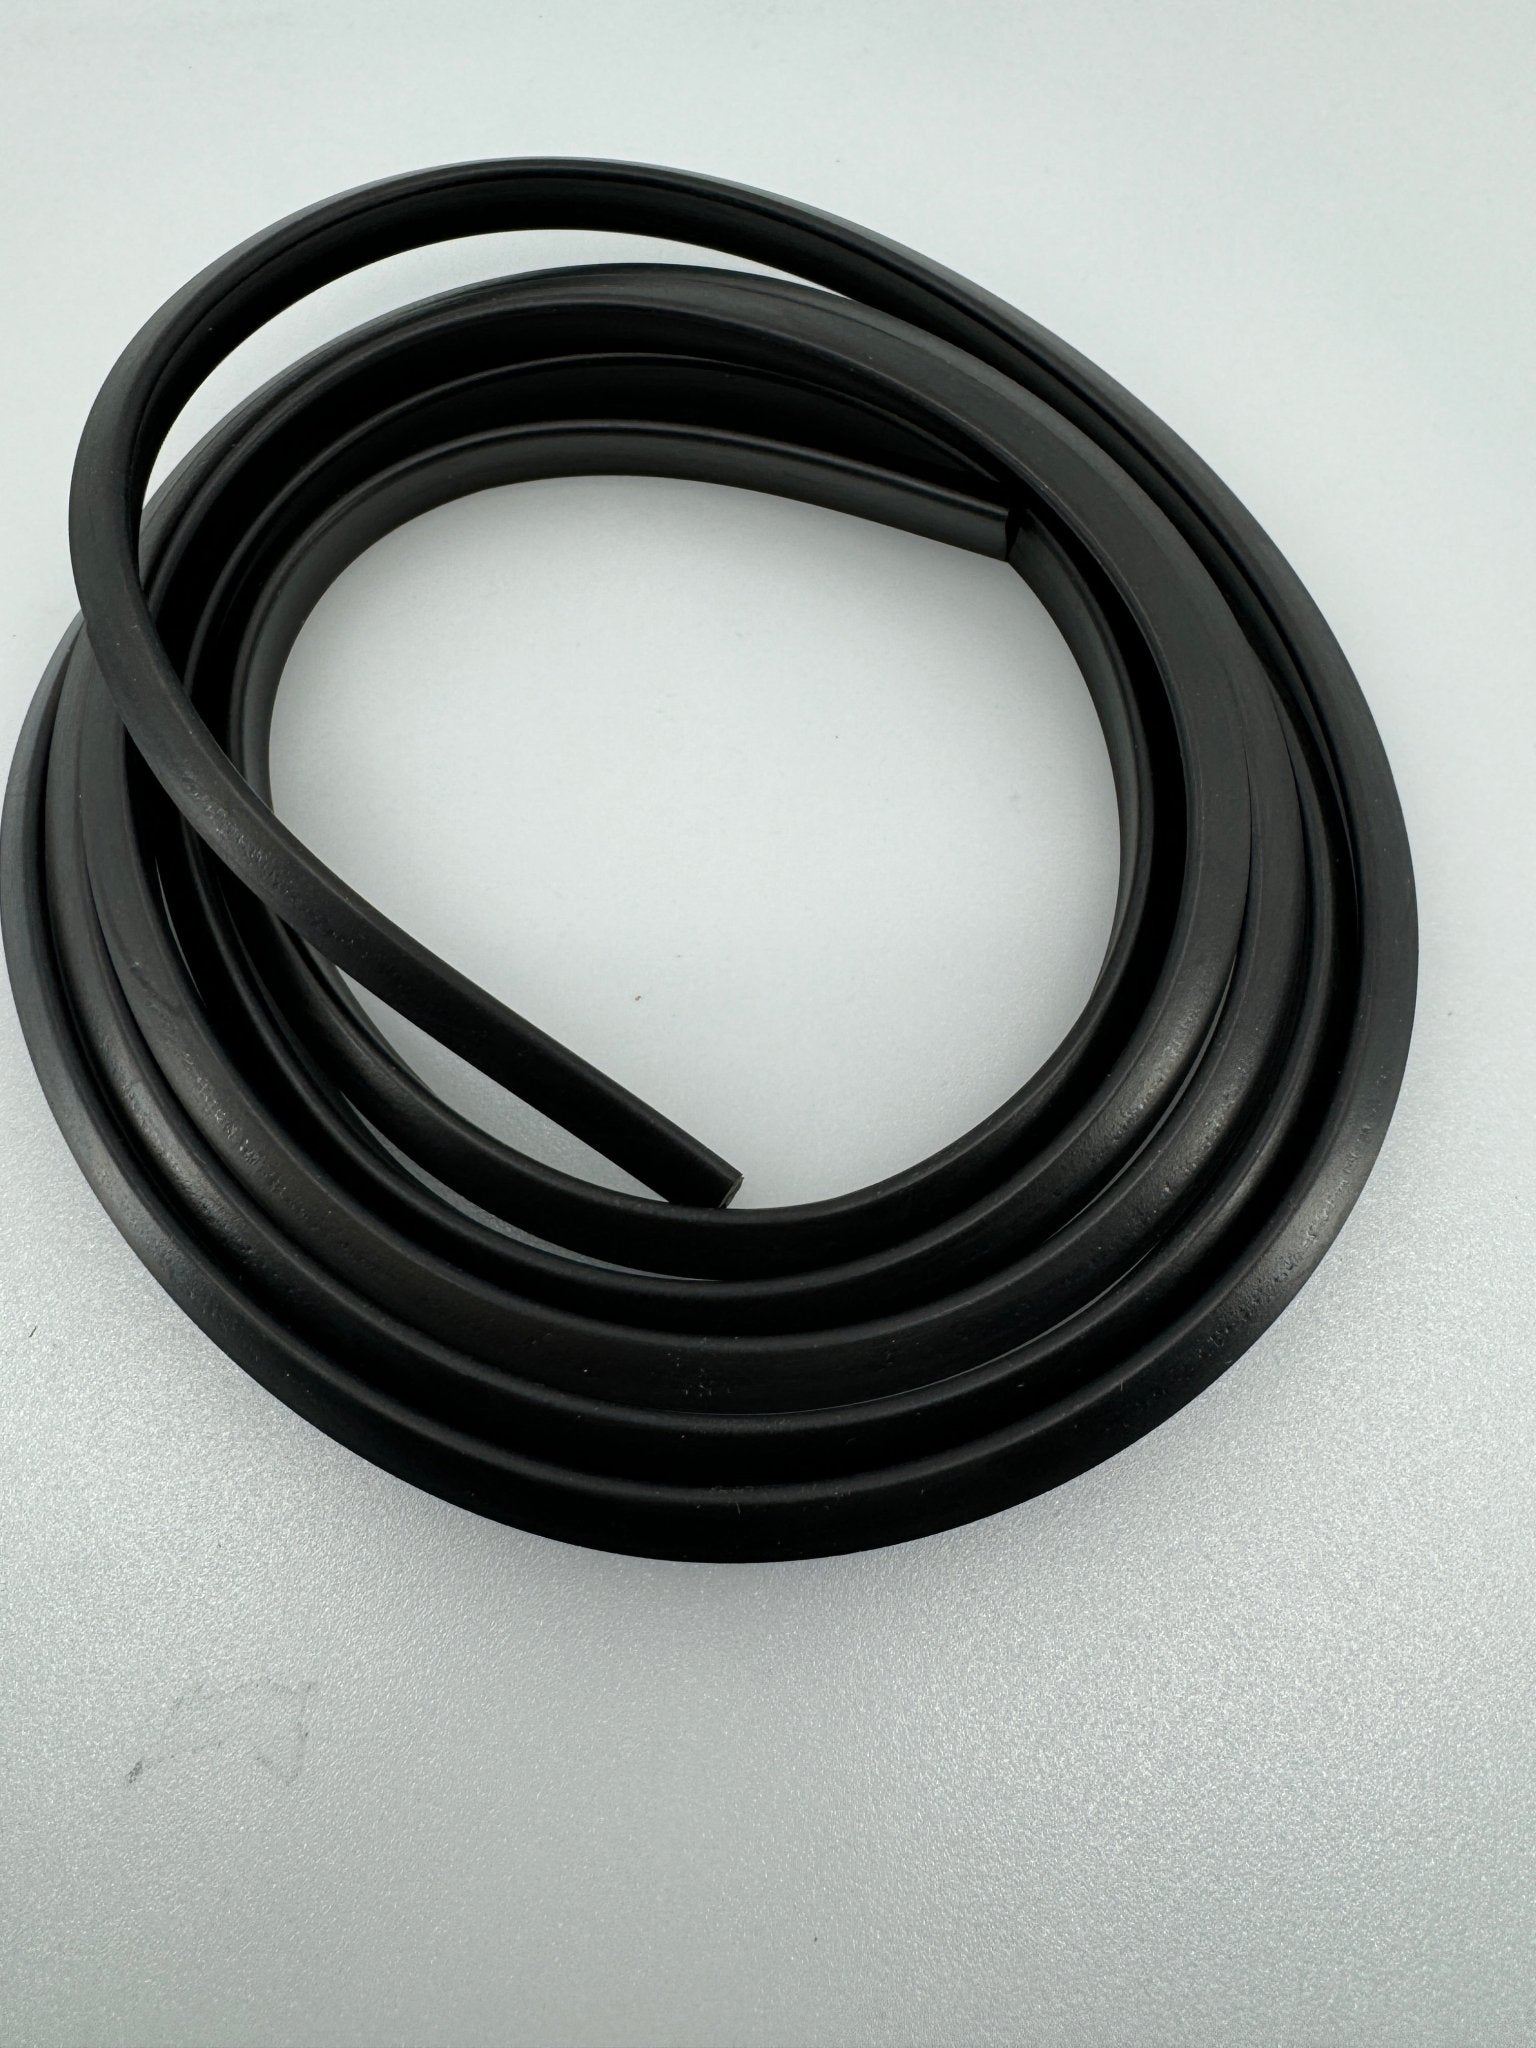 Clicky Clack Door Panel Retainer (2 meter) - Rubber Seal for CCD Trident / 2.4 and 2020 Extrusions - West3D 3D Printing Supplies - LDO Motors